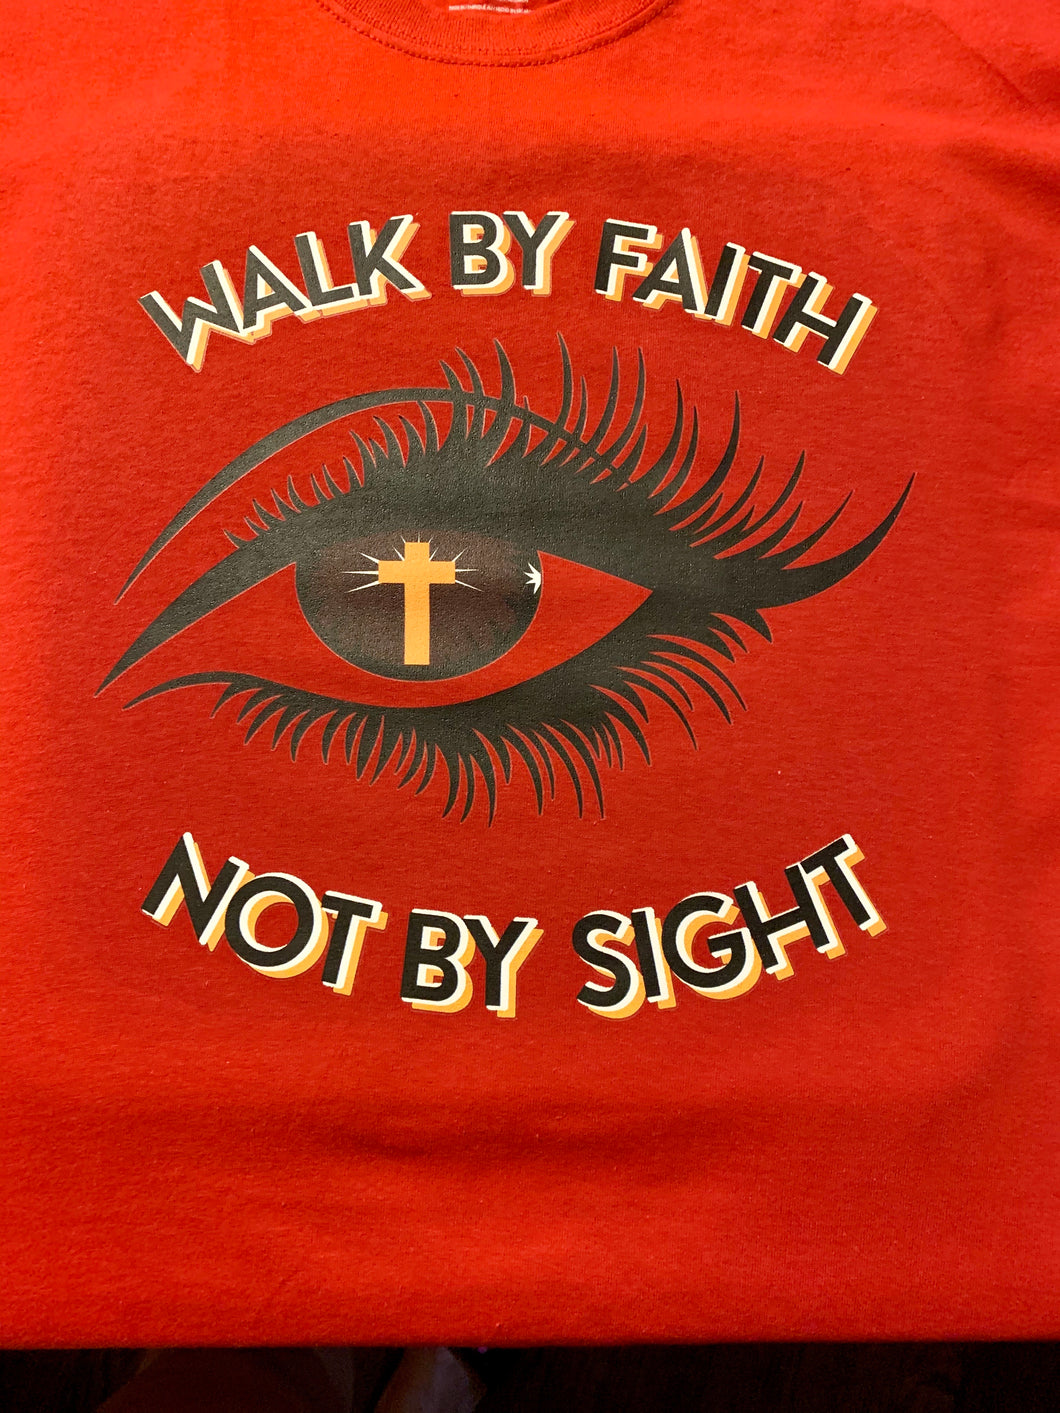 Walk By Faith  Not By Sight Graphic T